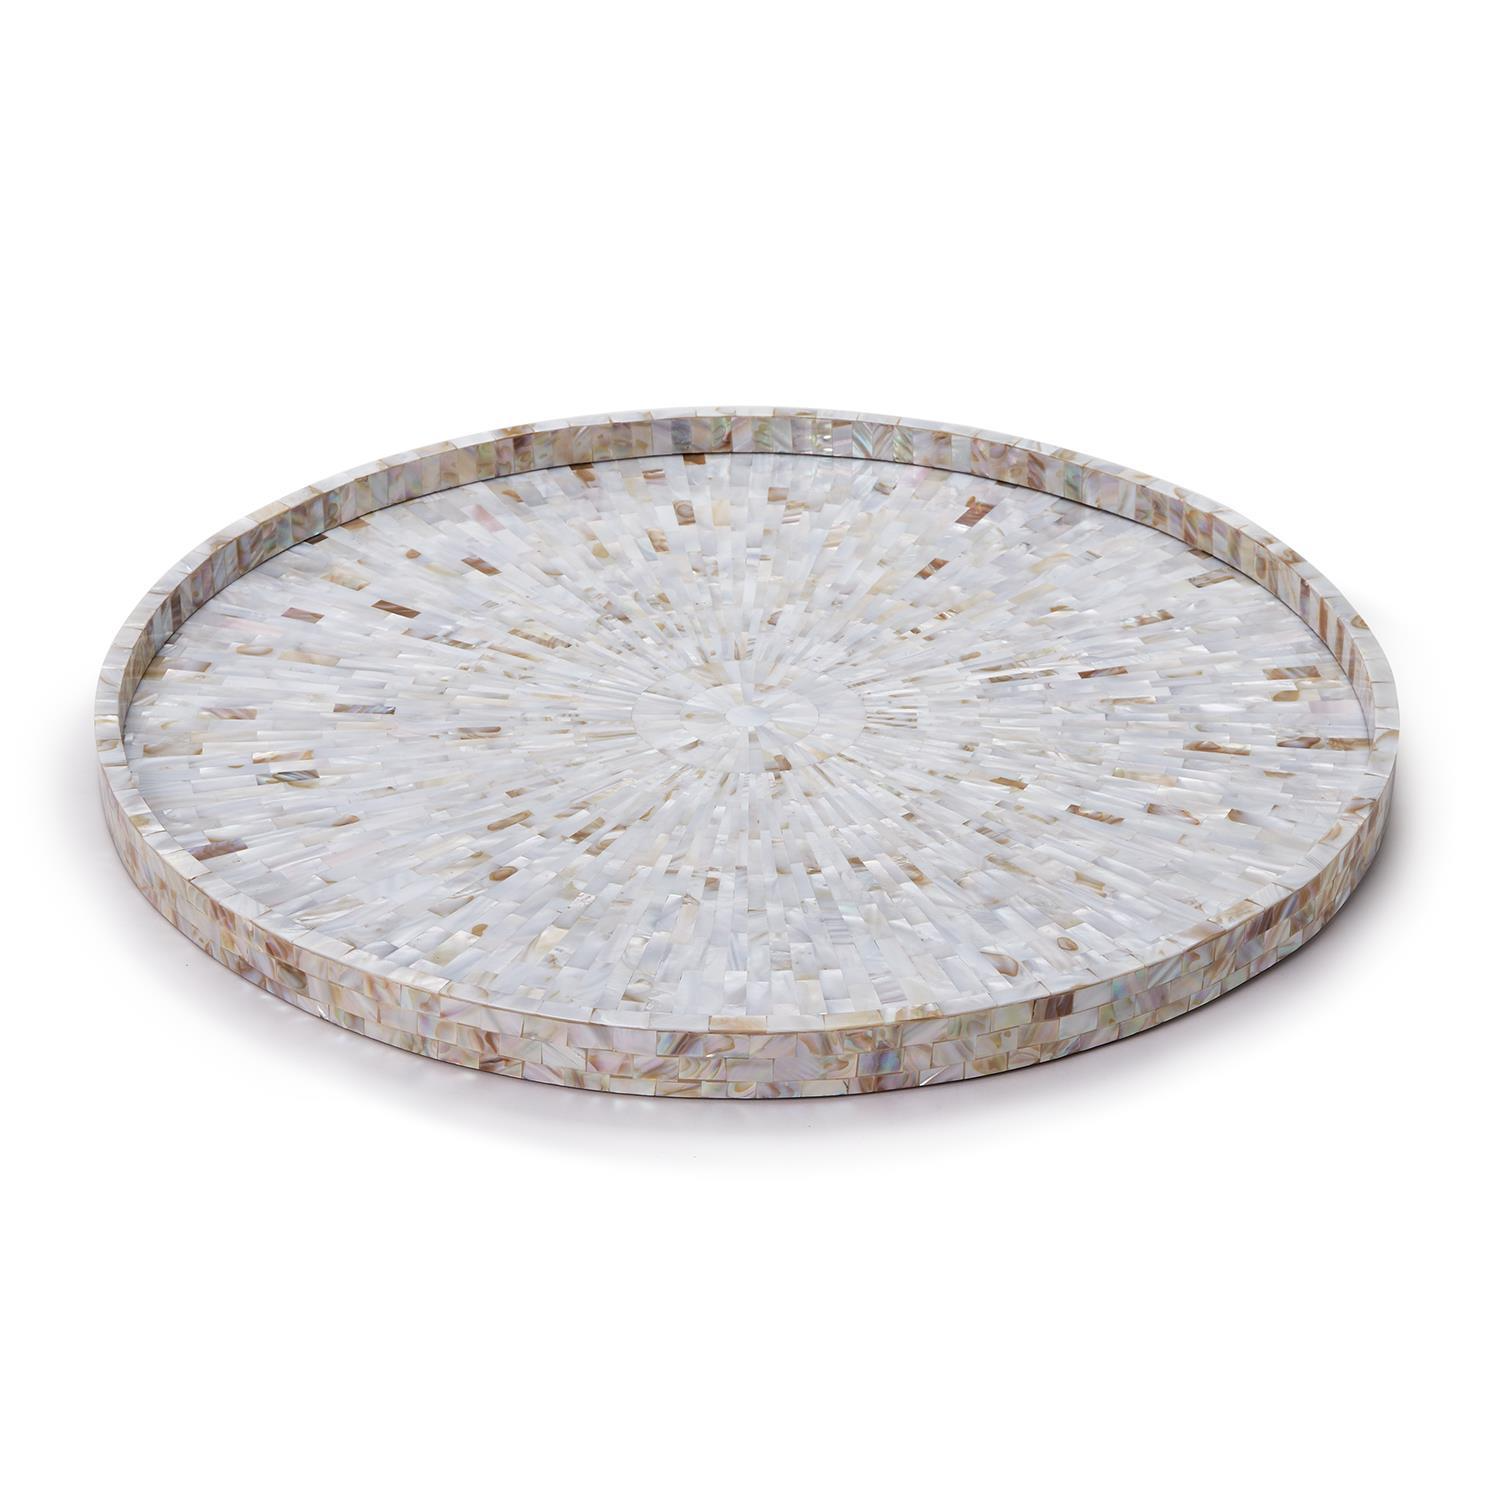 Jaipur Palace Mother of Pearl Inlaid Decorative Round Serving Tray - 24-in - Mellow Monkey